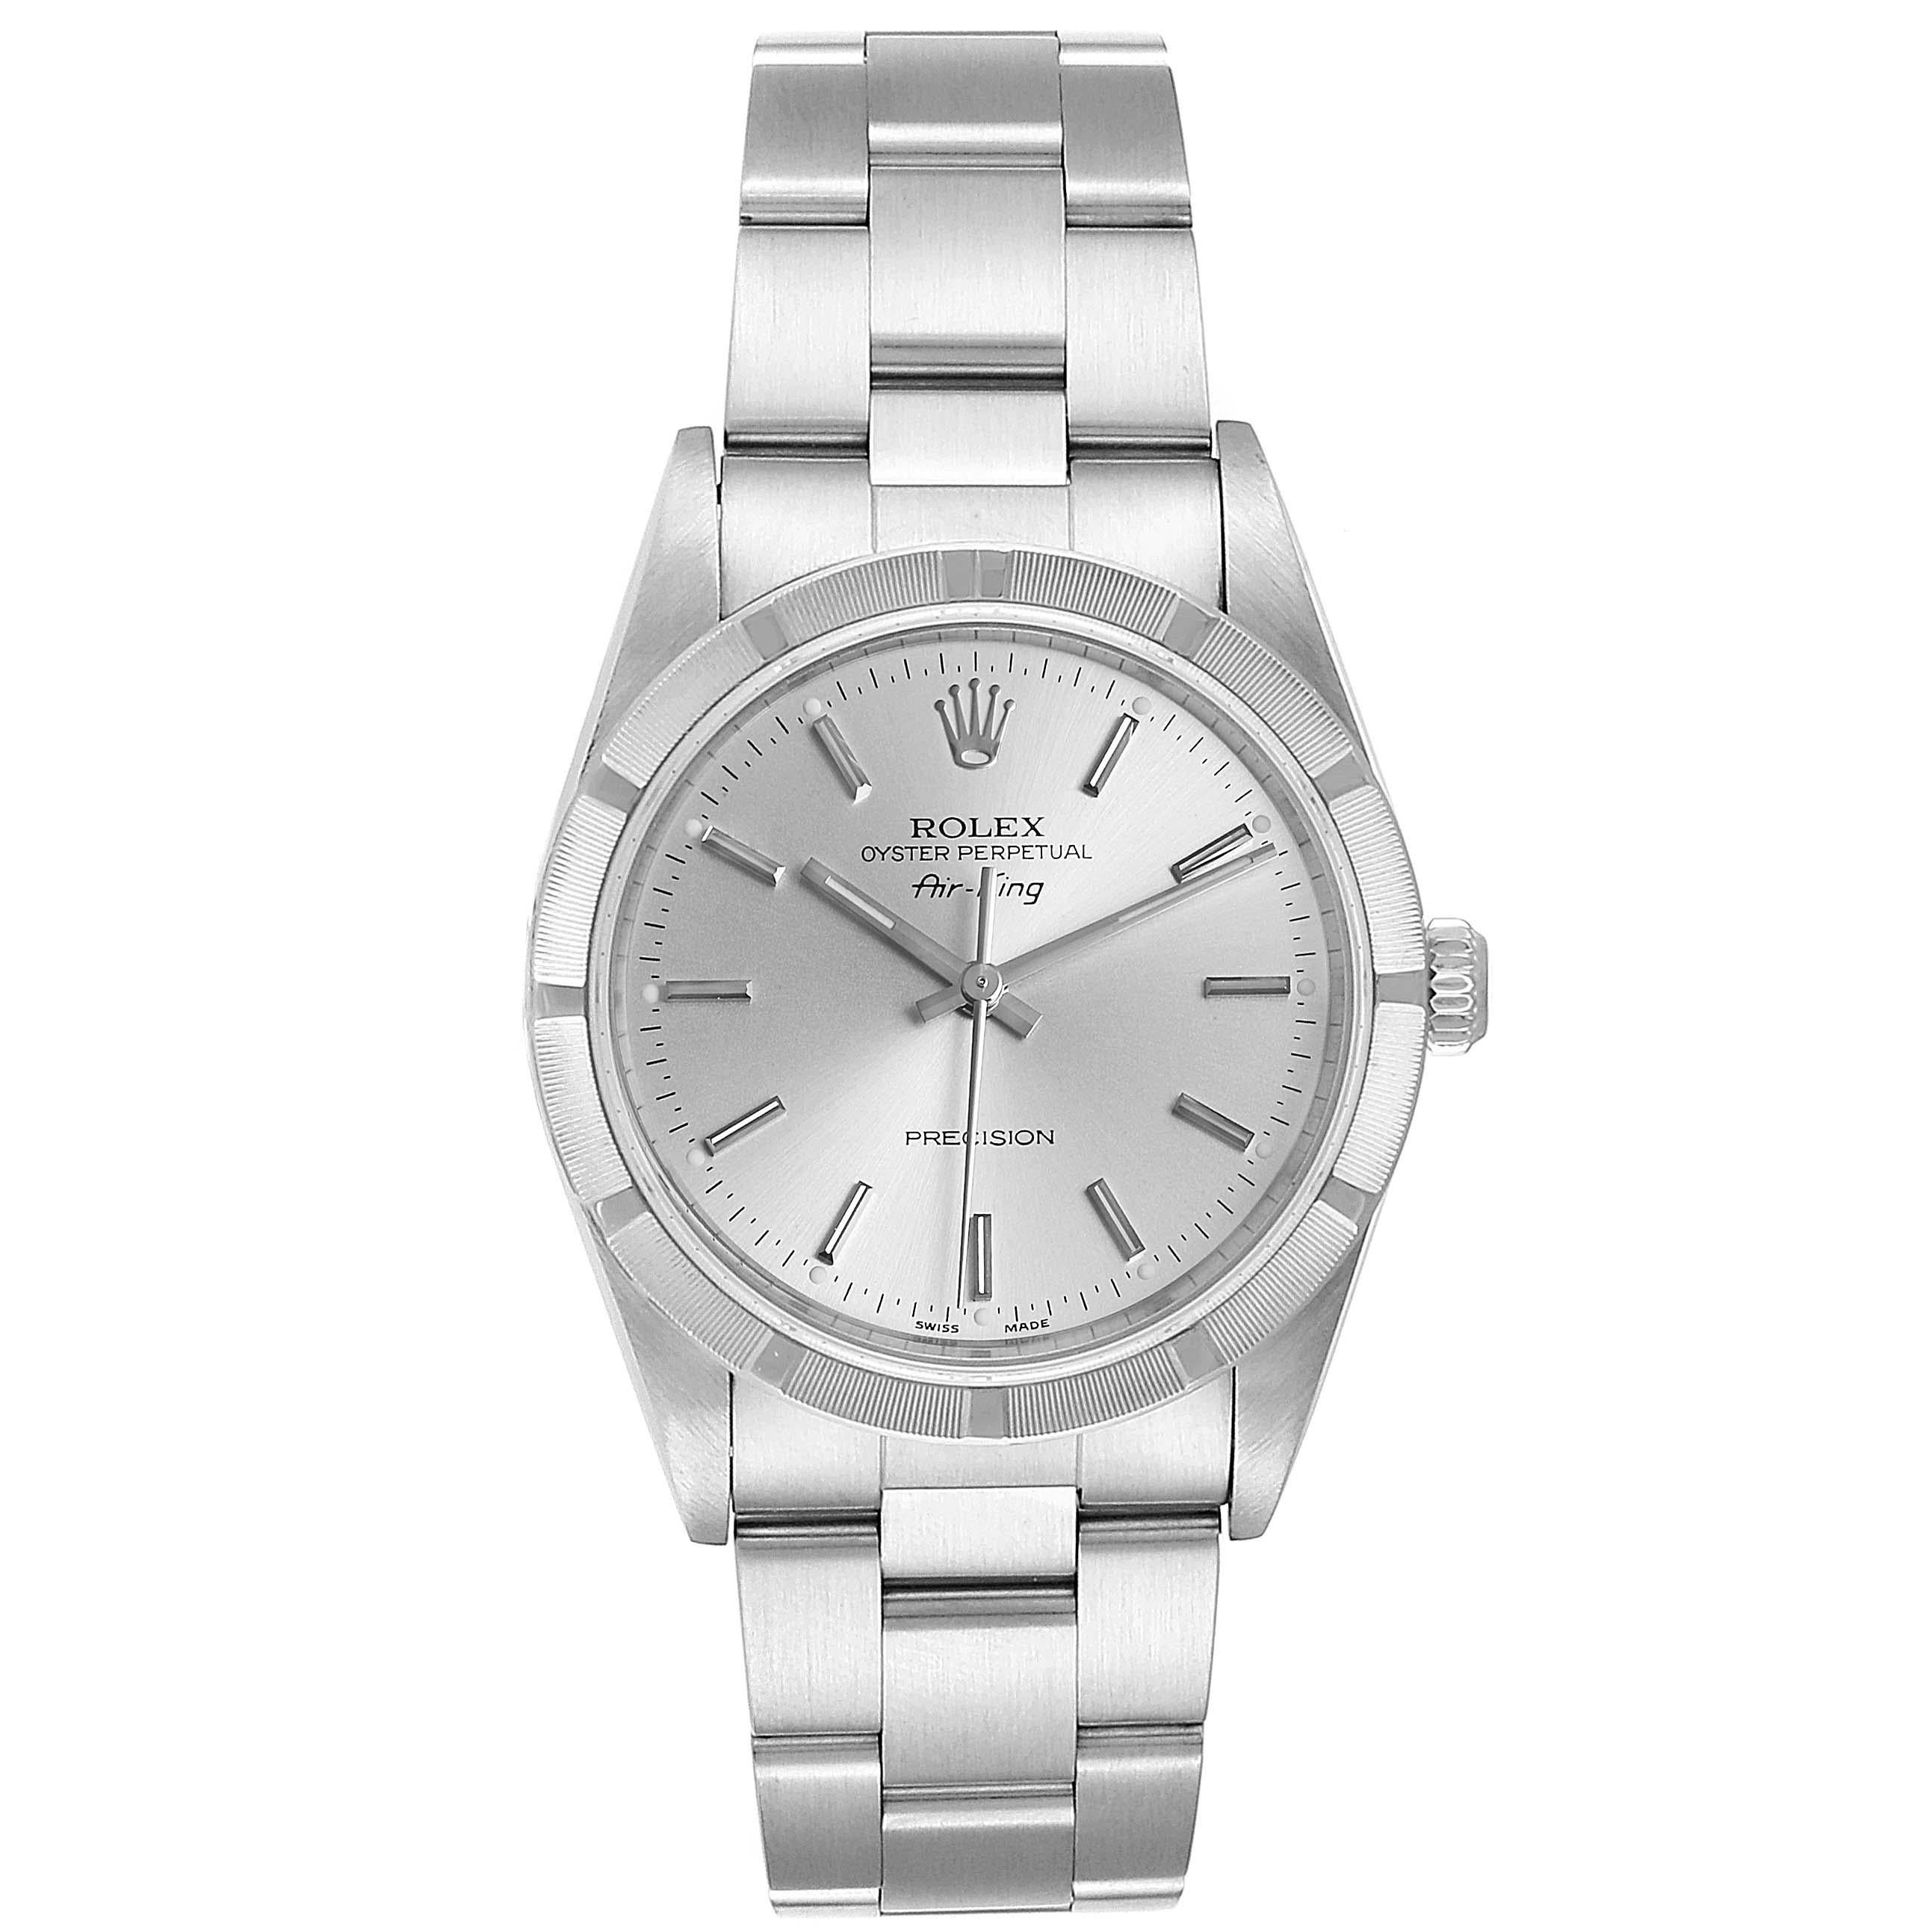 Rolex Air King Silver Dial 34mm Oyster Bracelet Steel Mens Watch 14010. Automatic self-winding movement. Stainless steel case 34.0 mm in diameter. Rolex logo on a crown. Stainless steel engine turned bezel. Scratch resistant sapphire crystal. Silver